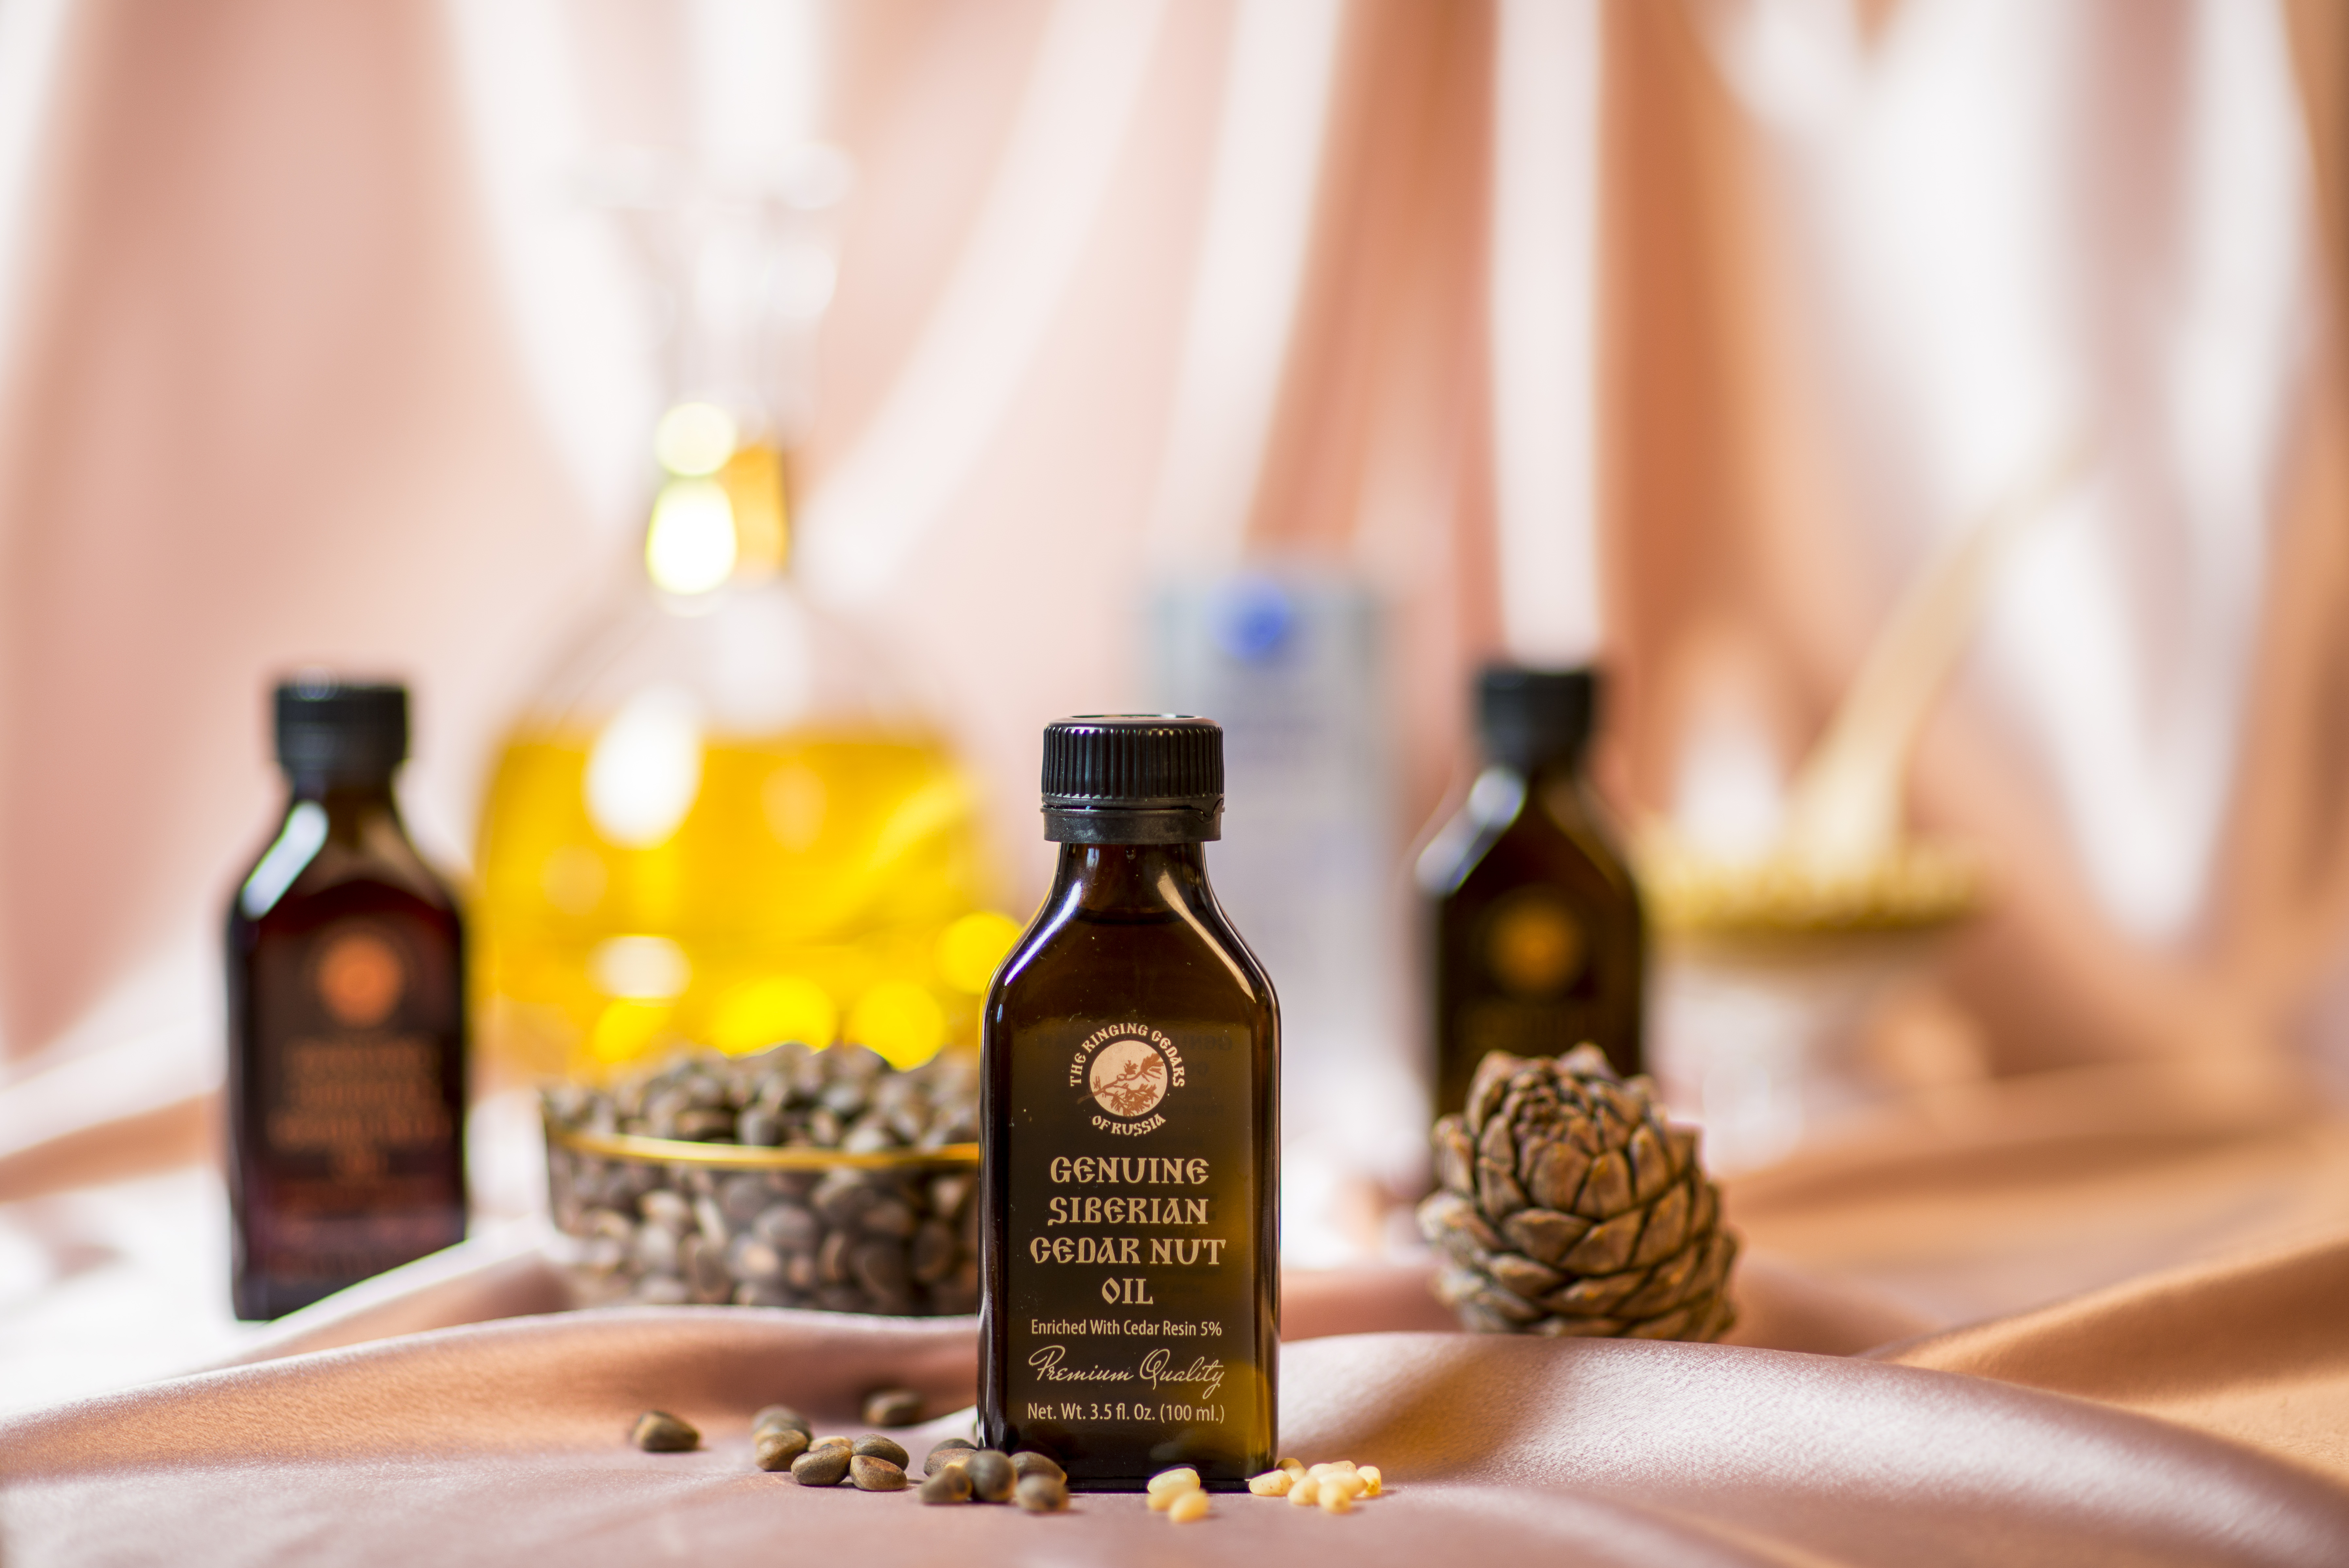 The use of cedar nut oil enriched with cedar resin in skin and hair care